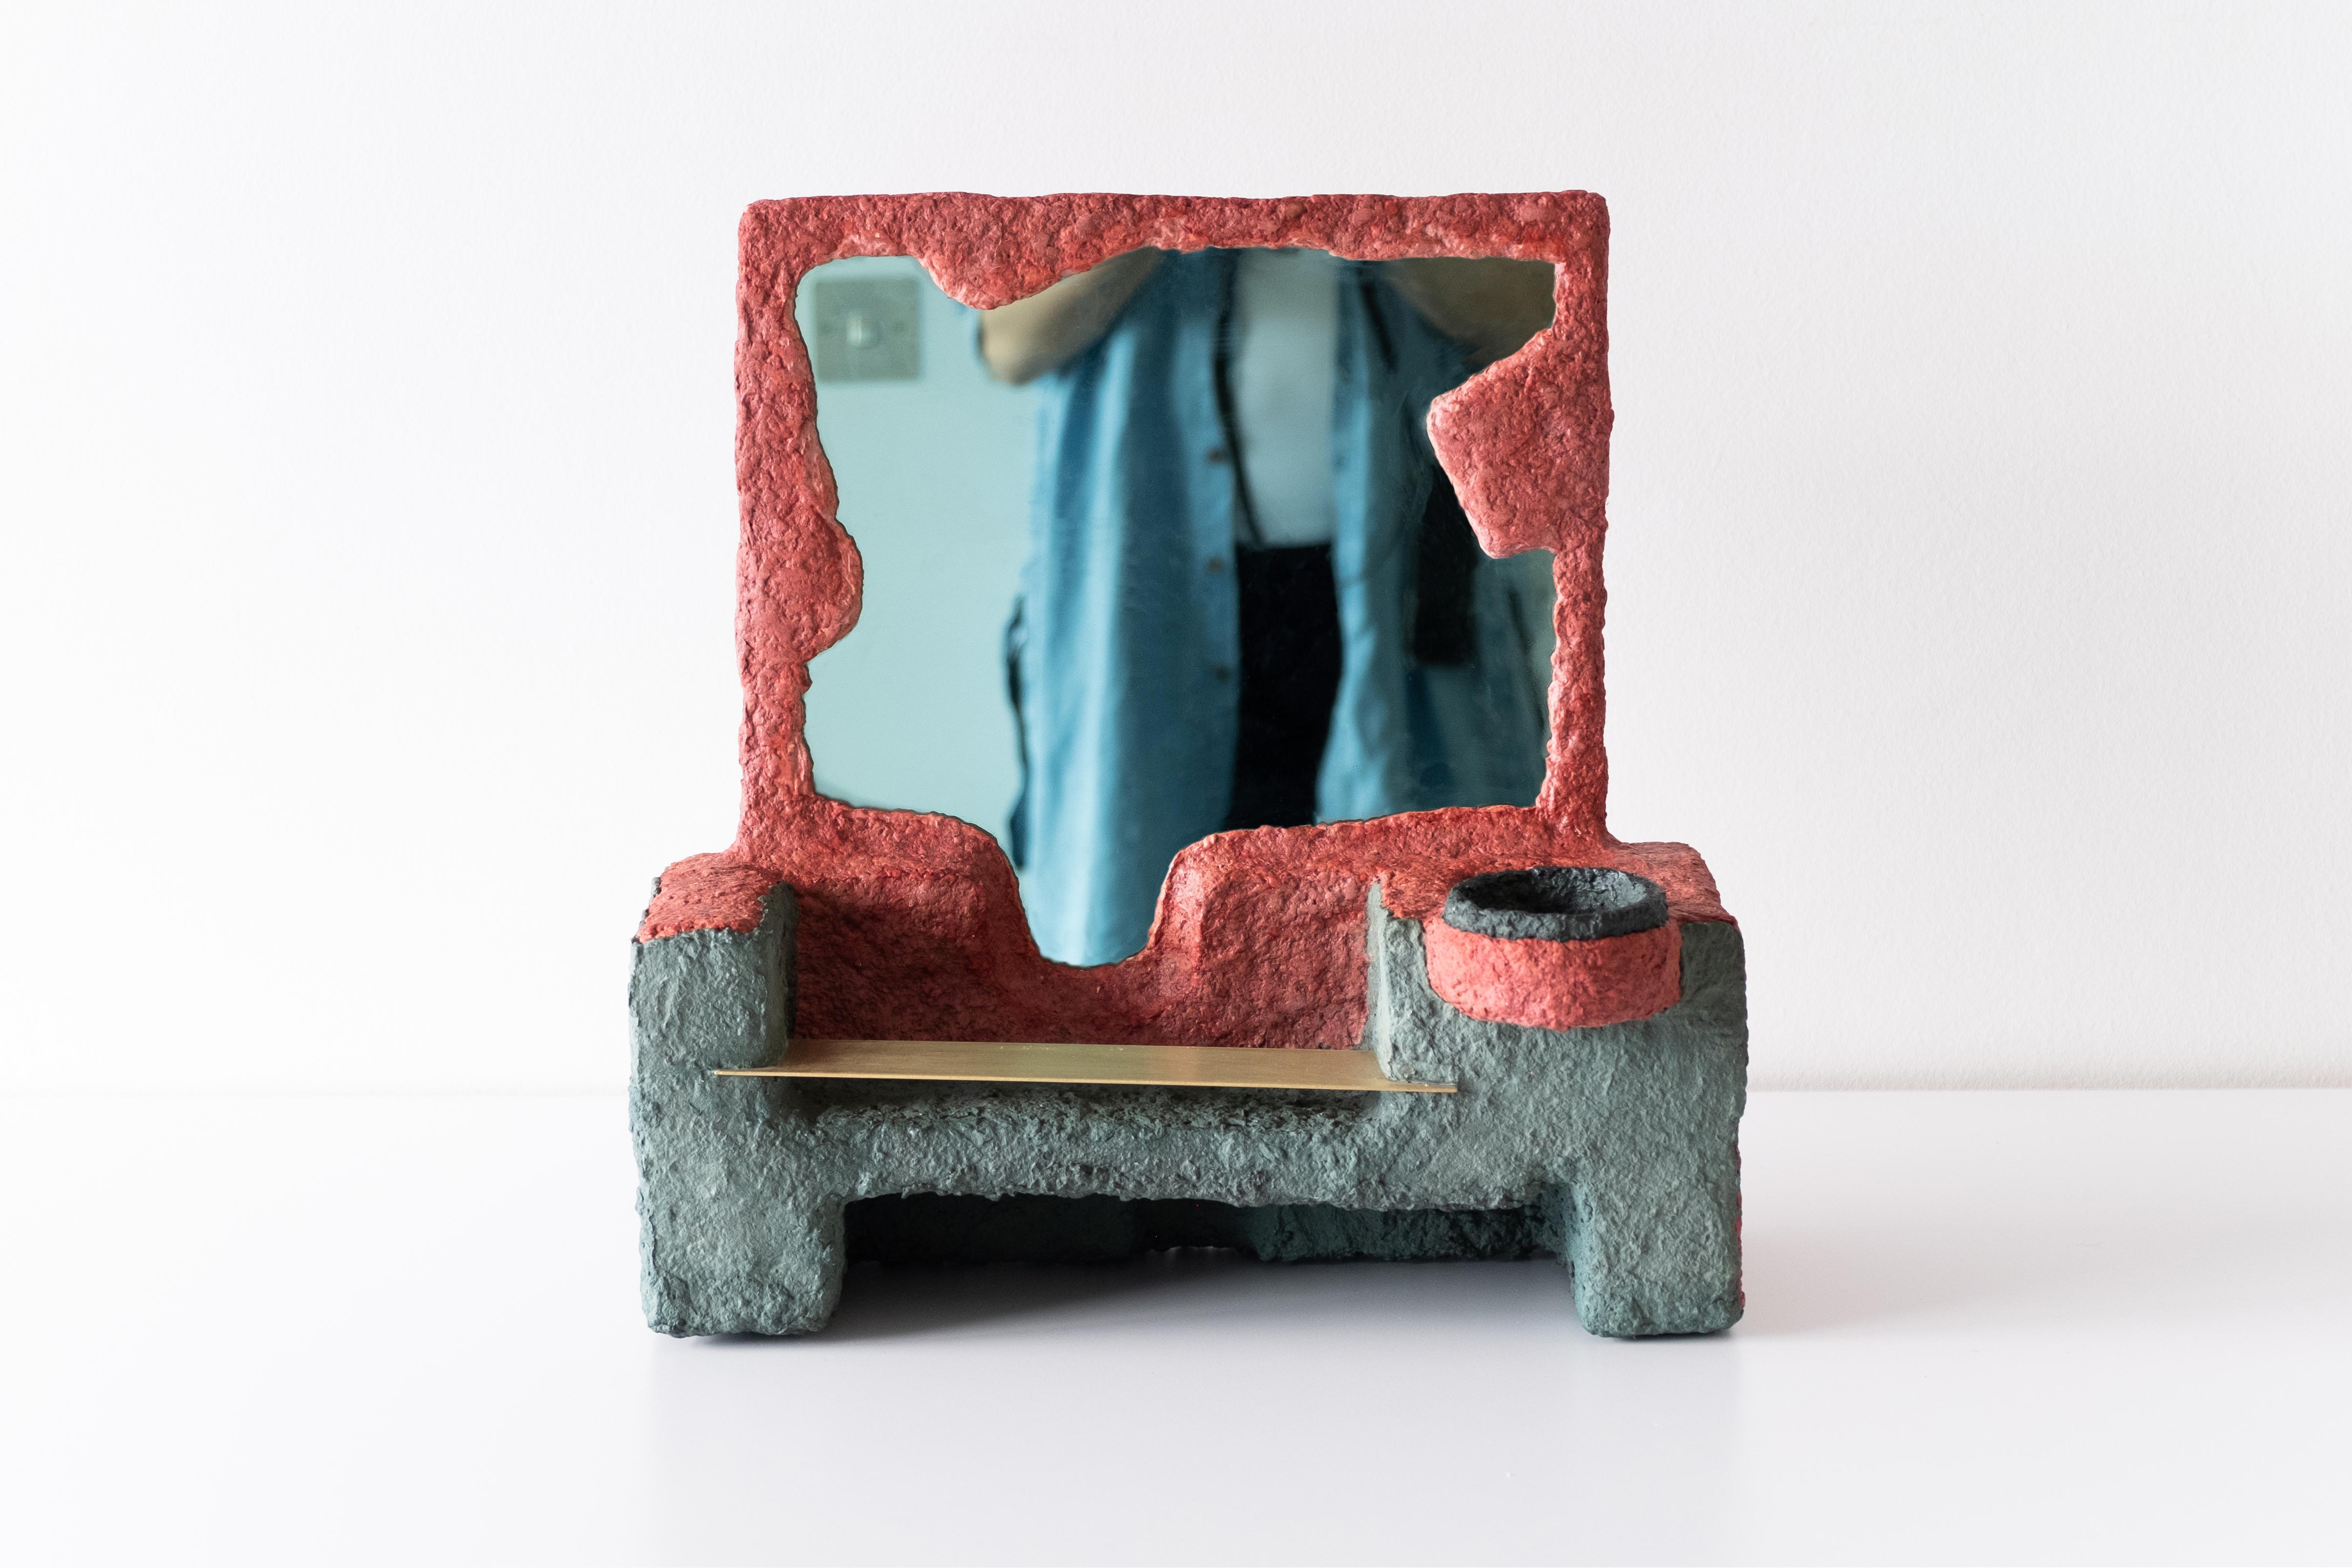 Barbican Mirror No.2 by A Space
Dimensions: D38,1 x W17,78 x H38,1 cm
Materials: Misc recycled.

The design duo conceived the Barbican Collection over the spring/summer of 2020 while on lockdown at the eponymous London architectural and cultural